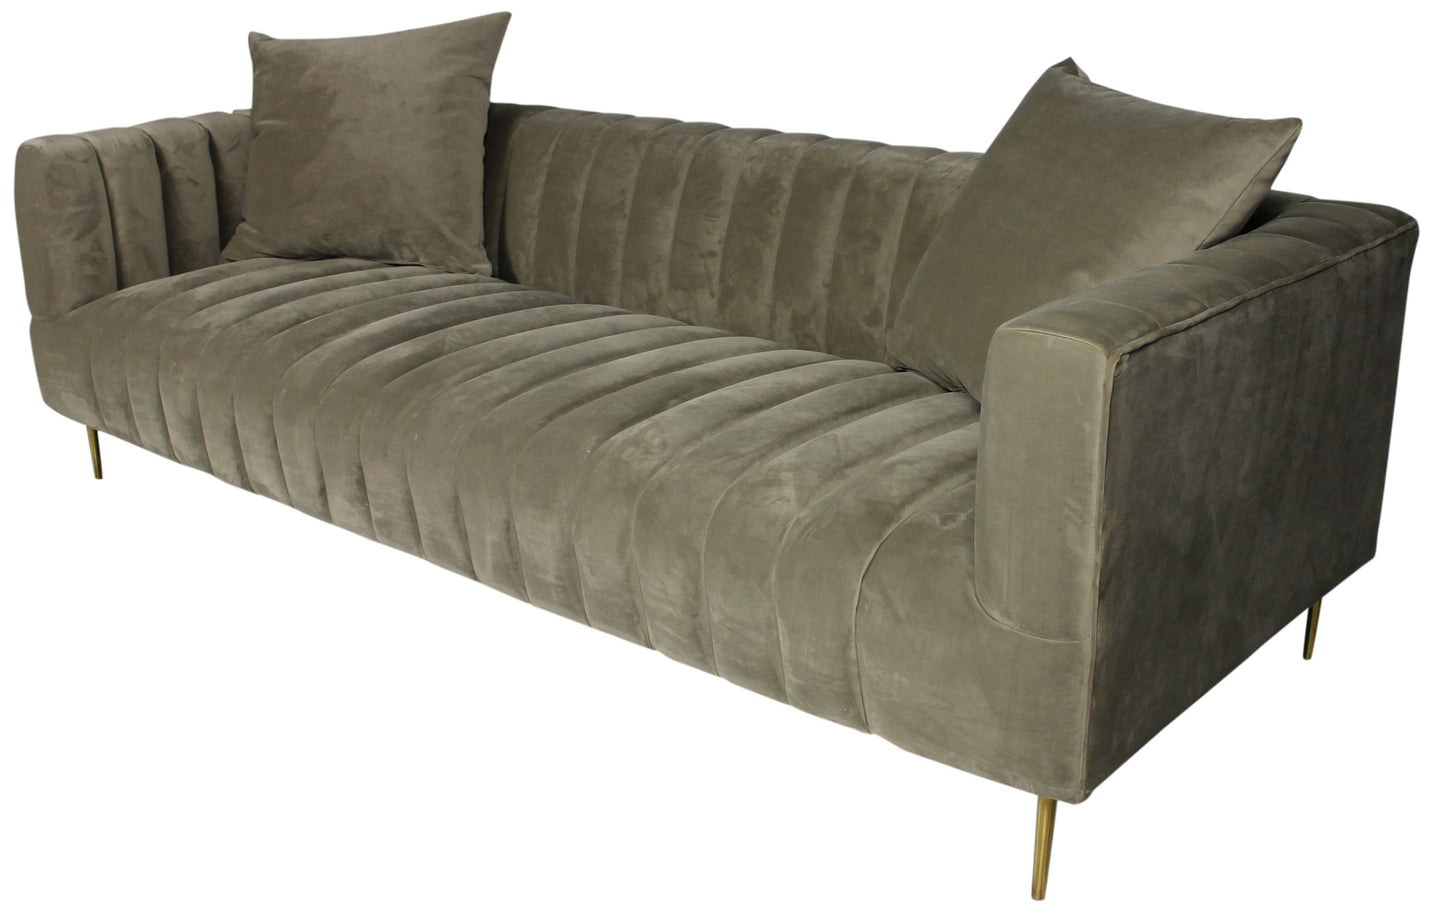 90" Gray Brown Velvet Sofa And Toss Pillows With Gold Legs